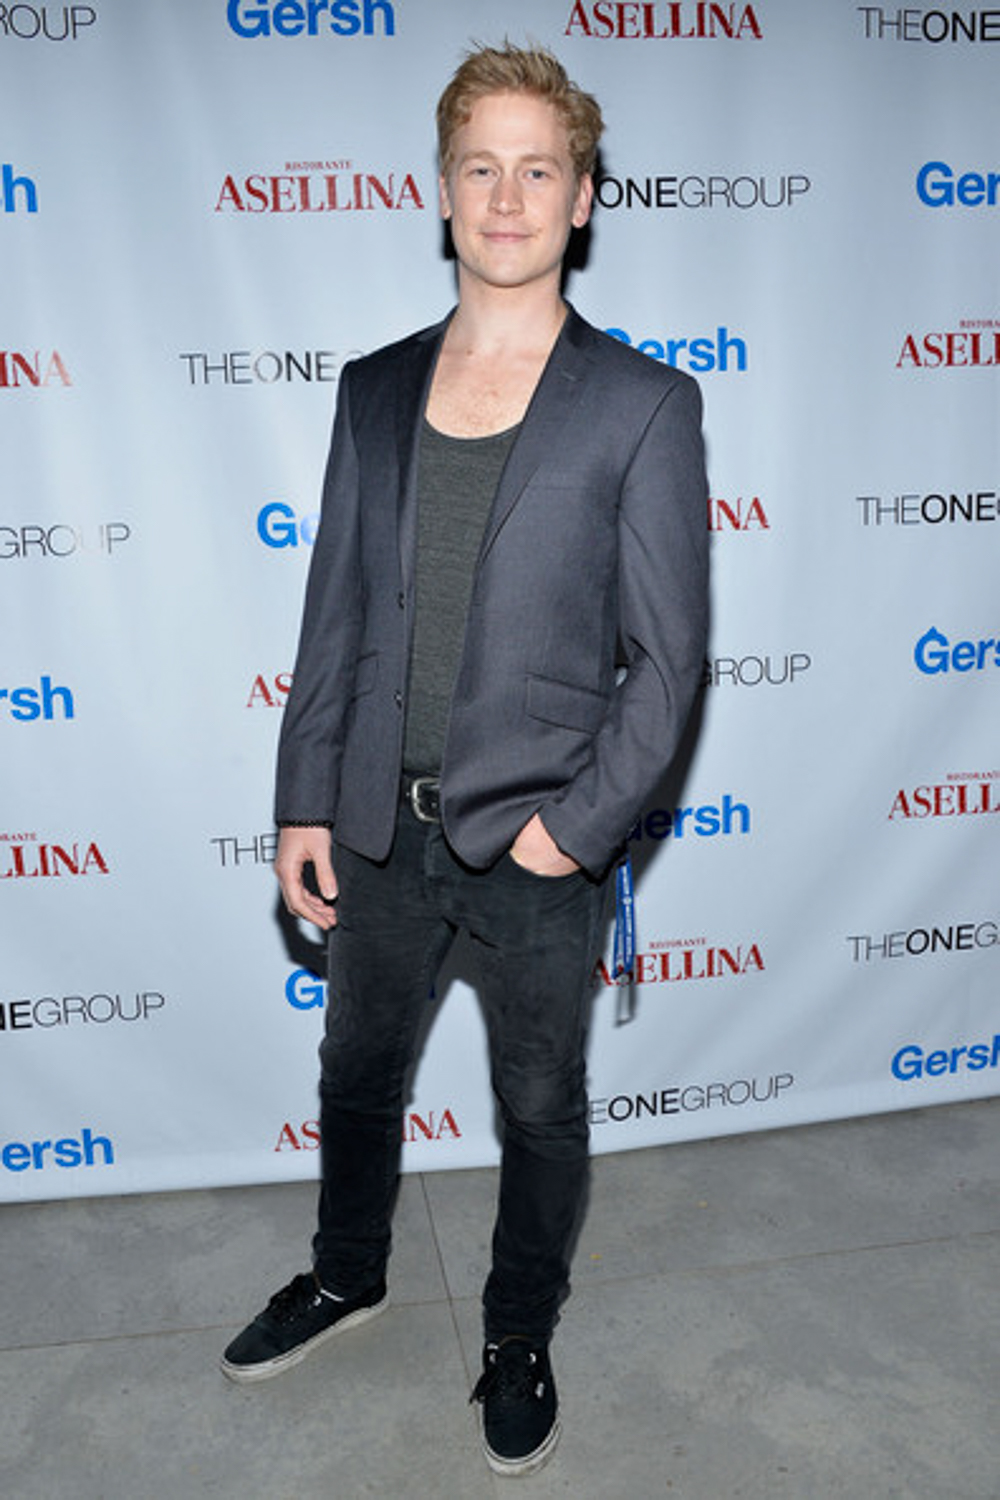 Actor Gavin Stenhouse attends the Gersh New York Upfronts Party at Asellina at the Gansevoort on May 13, 2014 in New York City.